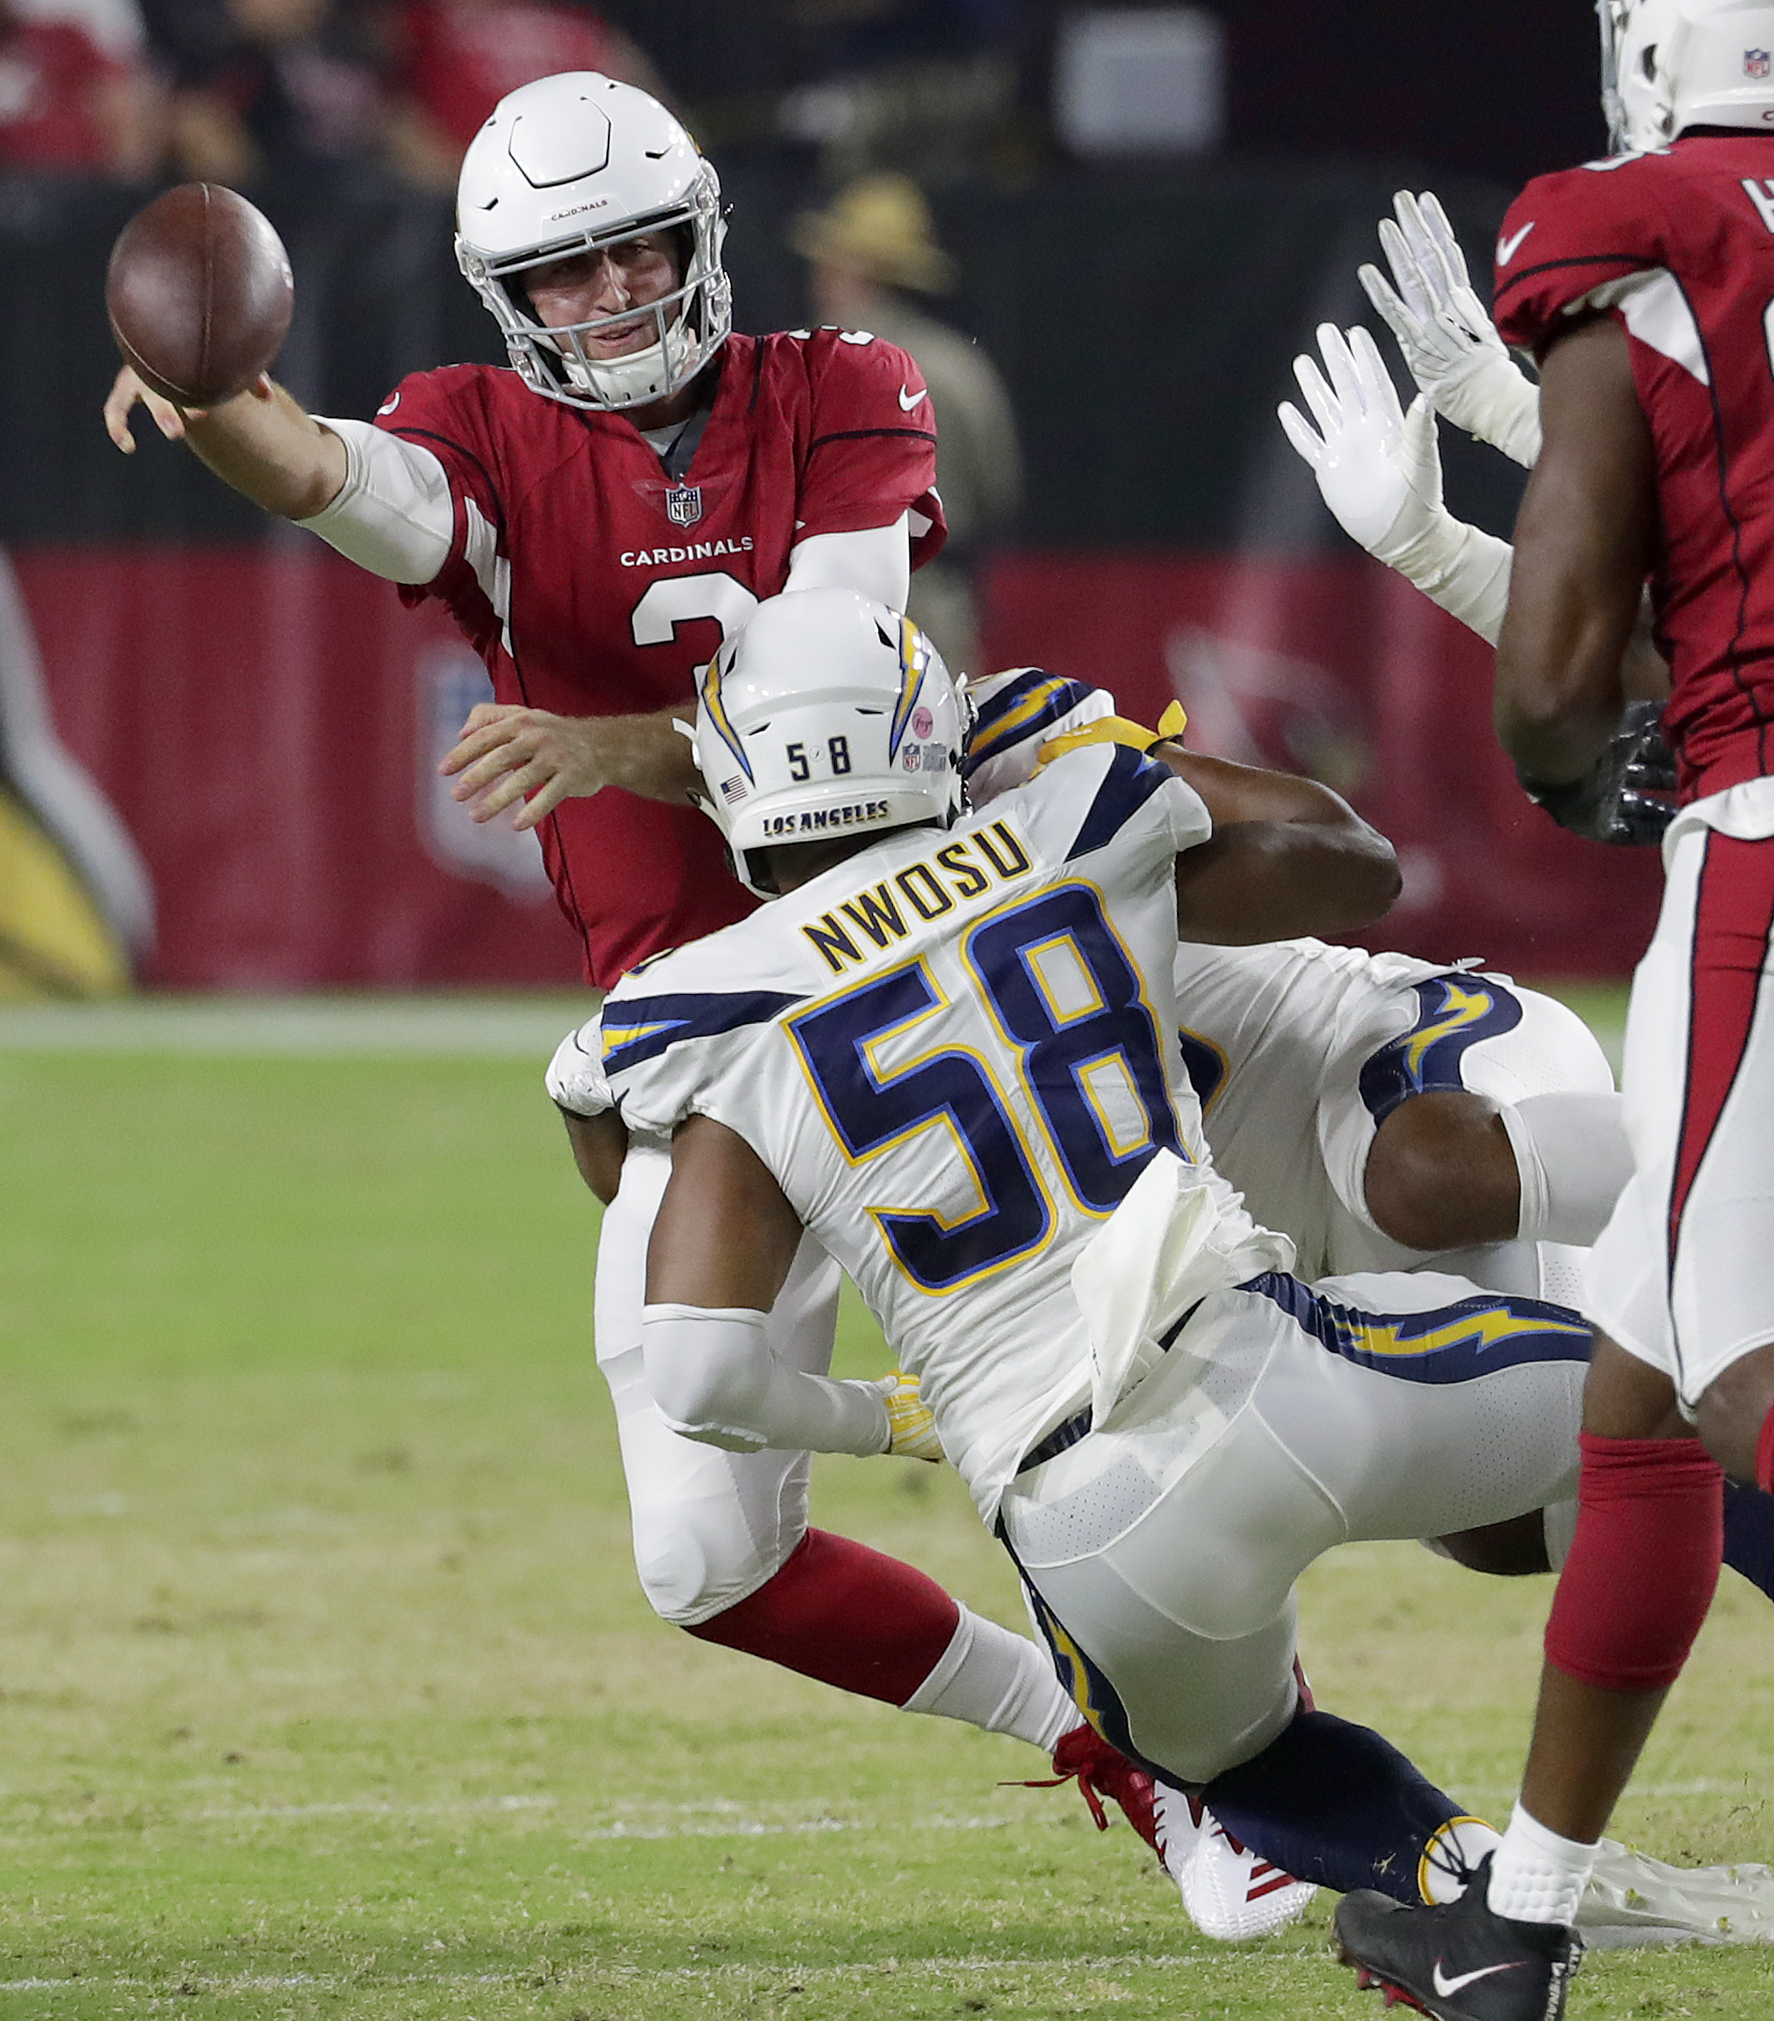 Kirk has big early play, Cardinals beat Chargers 24-17